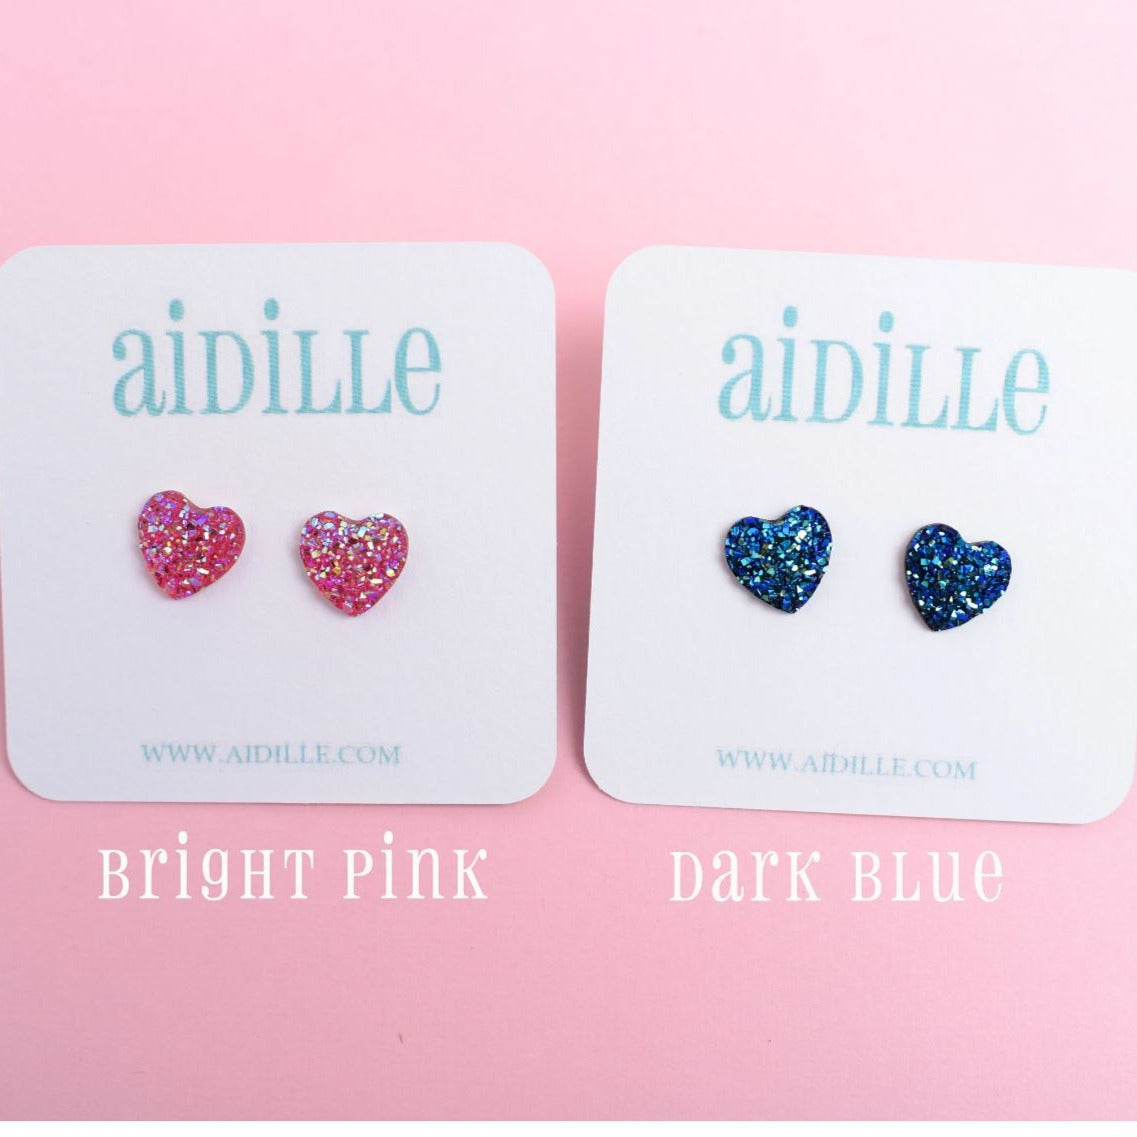 Sparkly Druzy 12mm Heart Earrings in Rainbow Colors with Titanium Posts